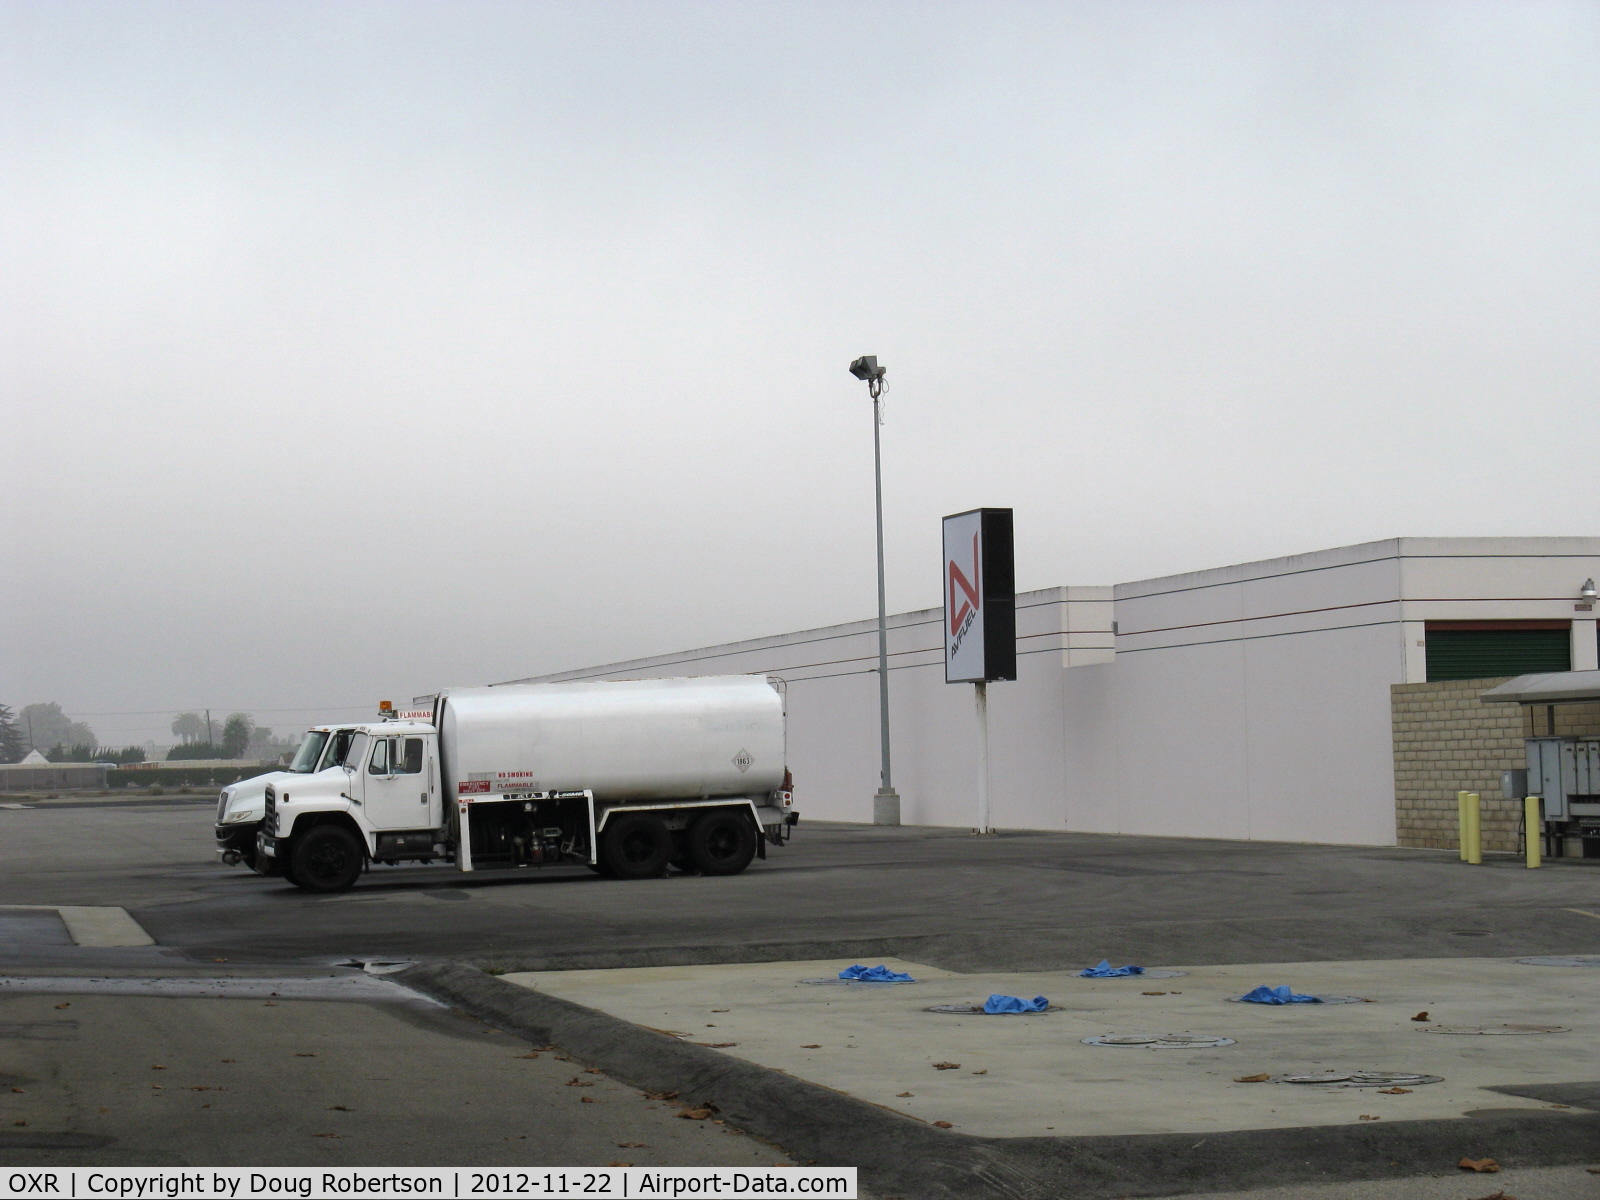 Oxnard Airport (OXR) - New fuel supplier-AVFUEL replaced BP Fuel at Golden West Aviation fuel dock for 100LL. Jet-A and Jet-A-Prist. Foggy day.